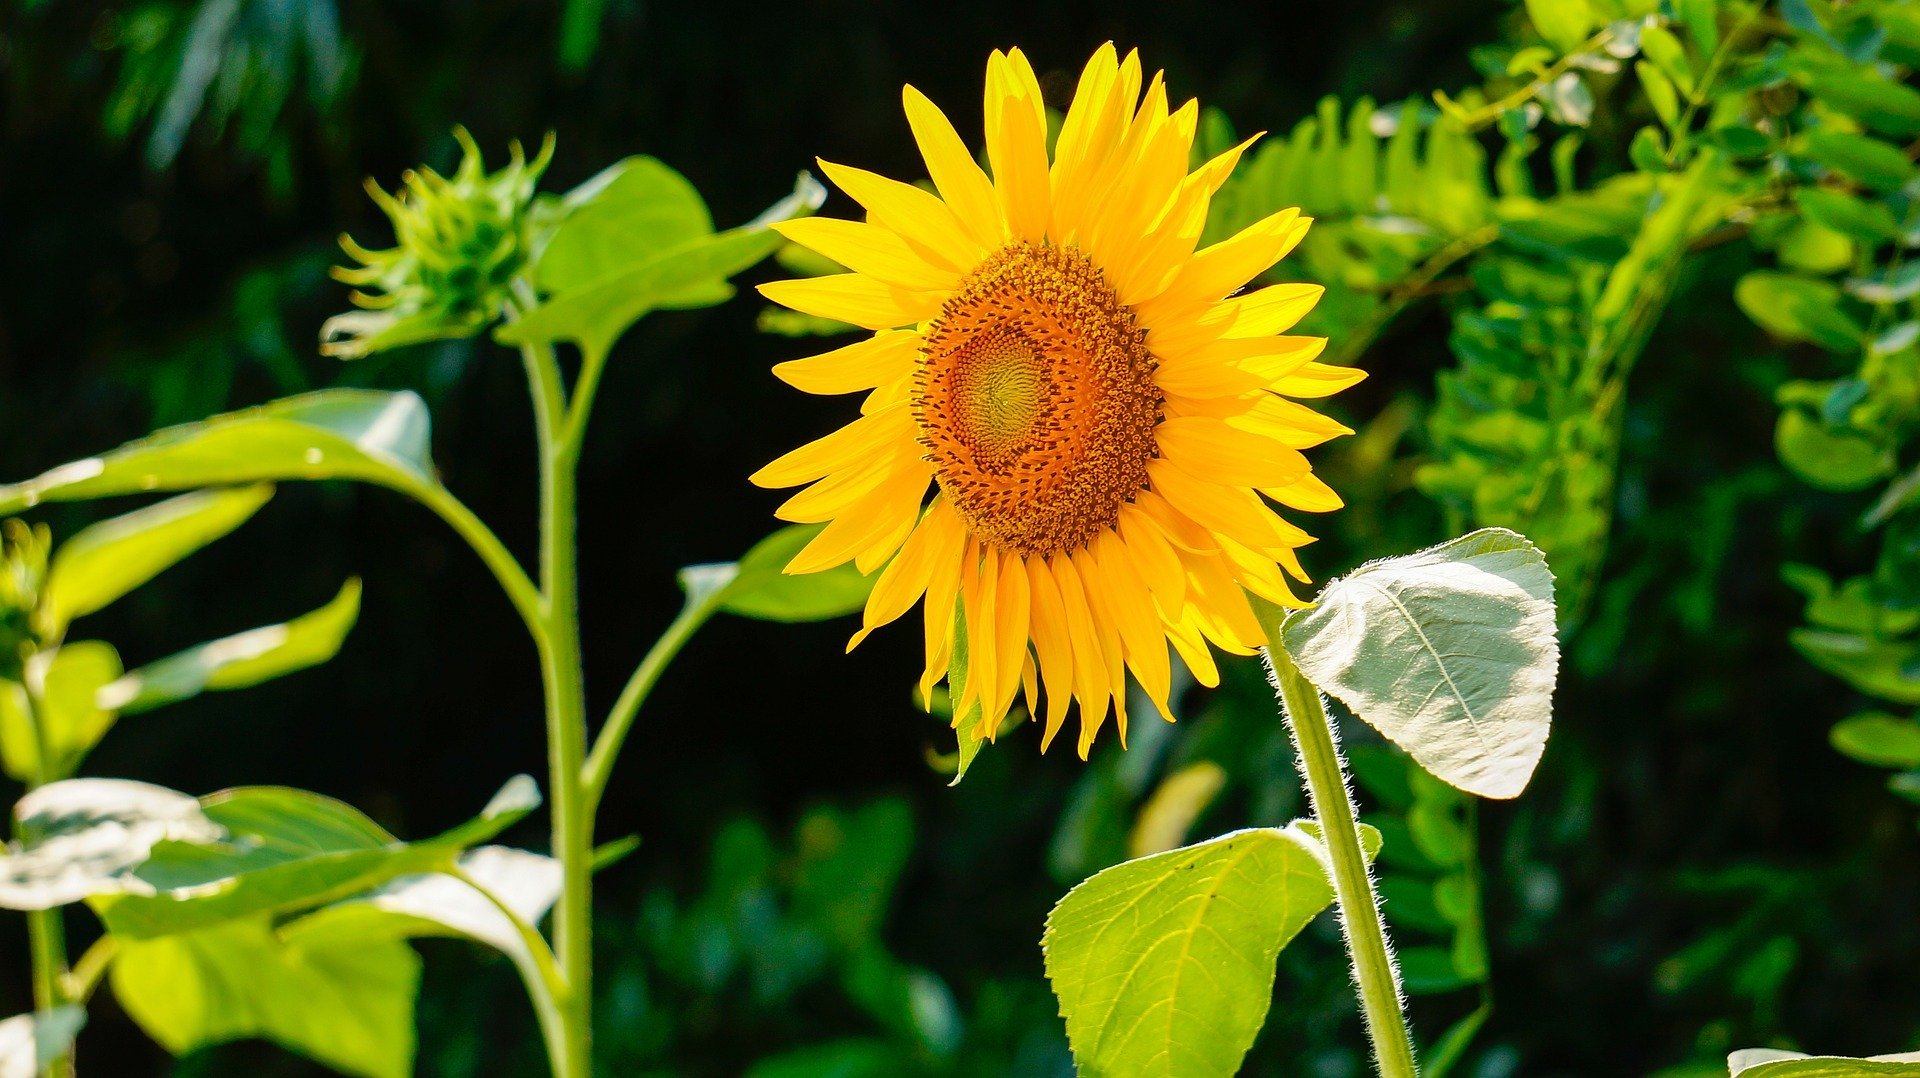 Sunflower Growing Competition – Ready, set, grow!